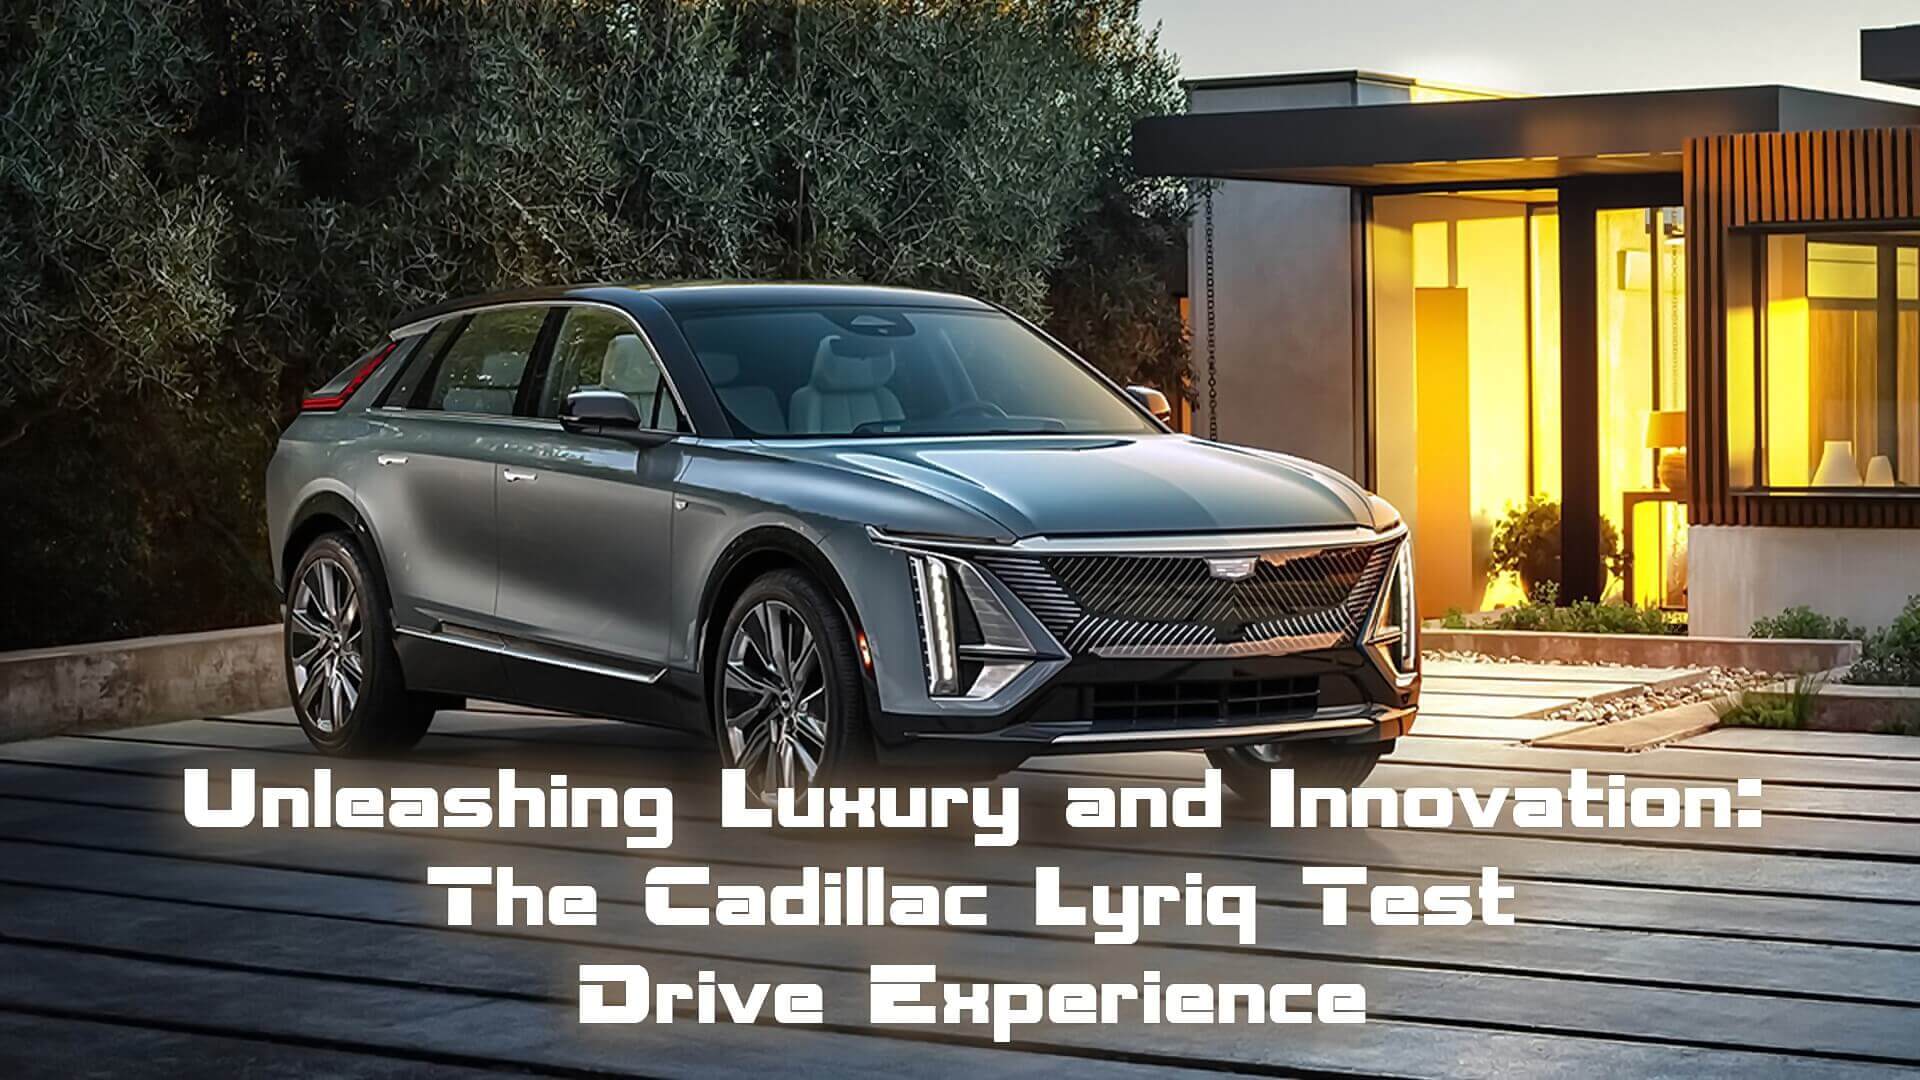 Luxury and Innovation: The Cadillac Lyriq Test Drive Experience